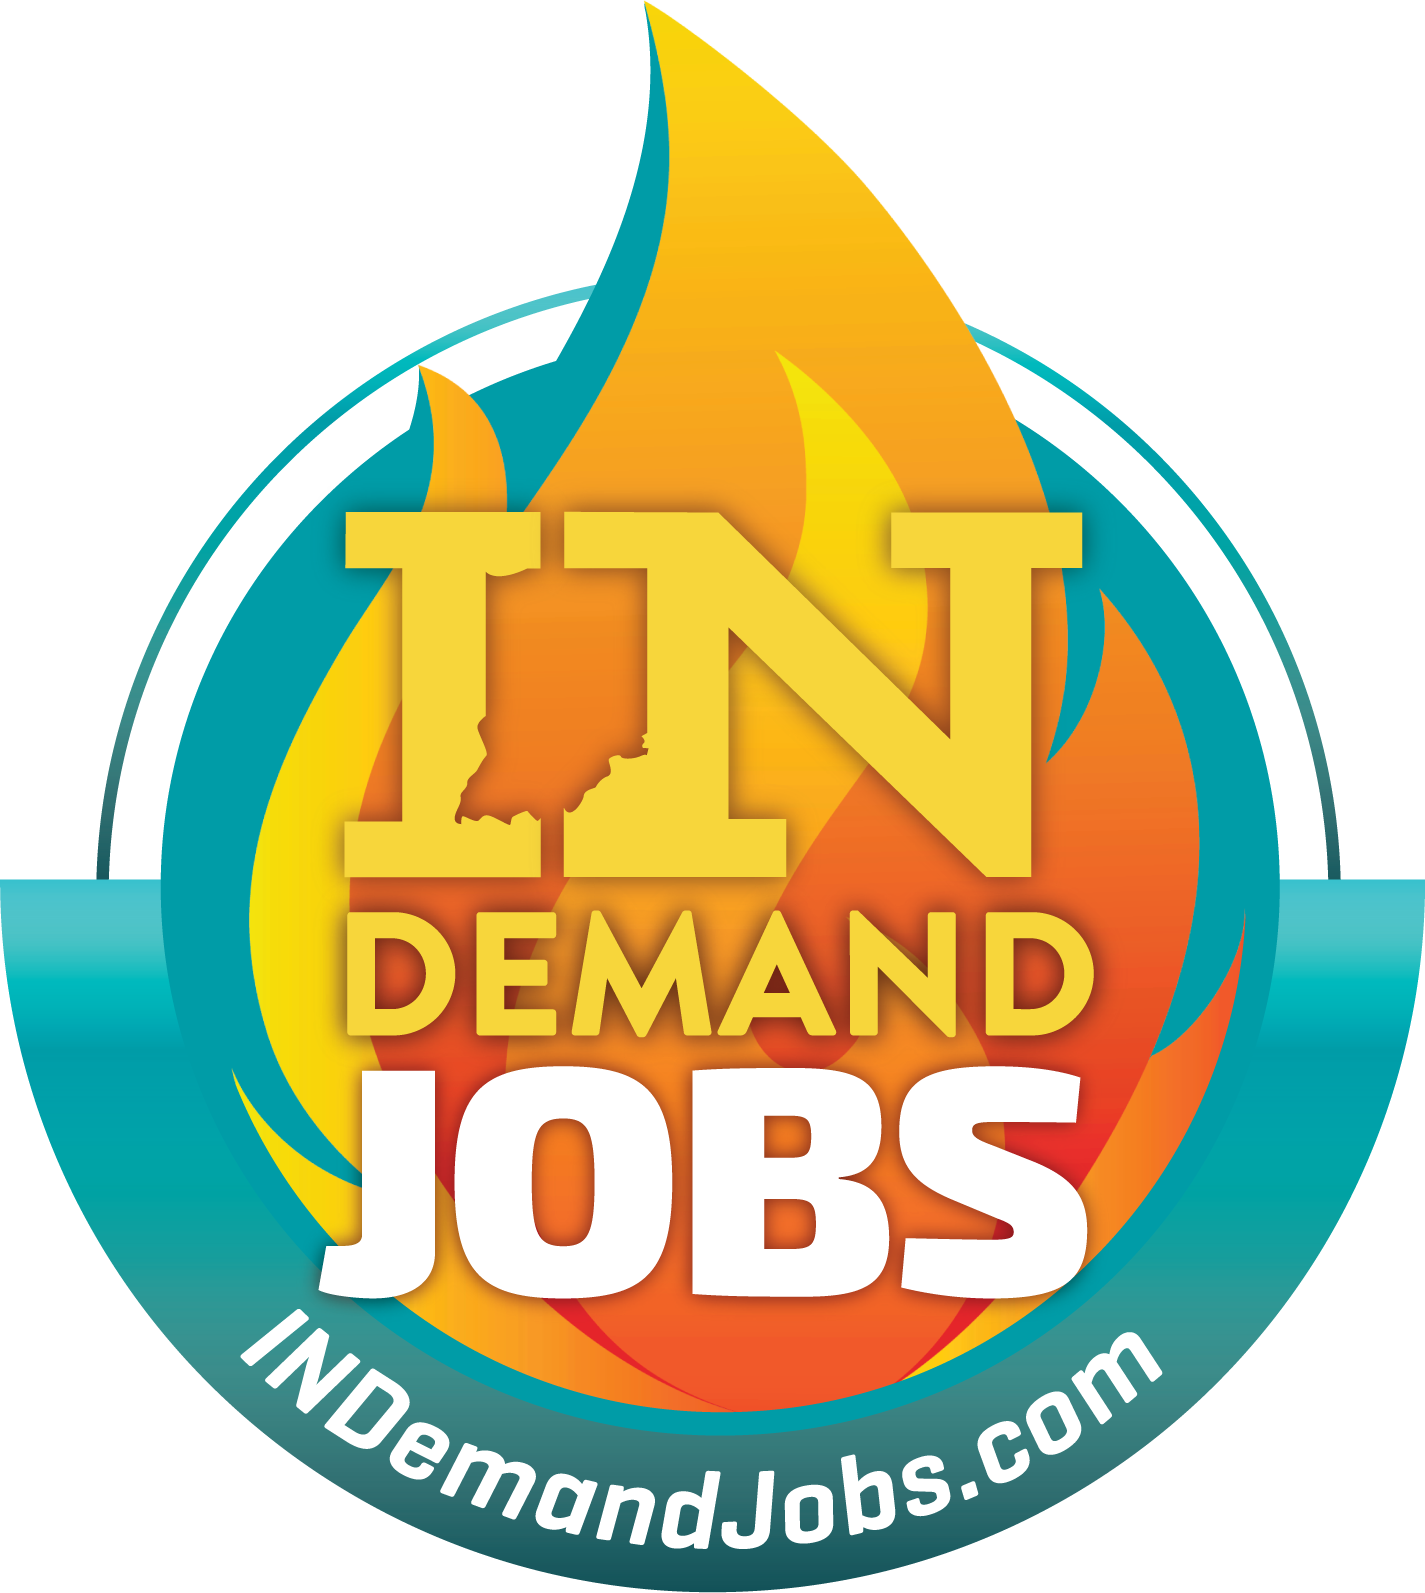 Visit the InDemand Jobs Page